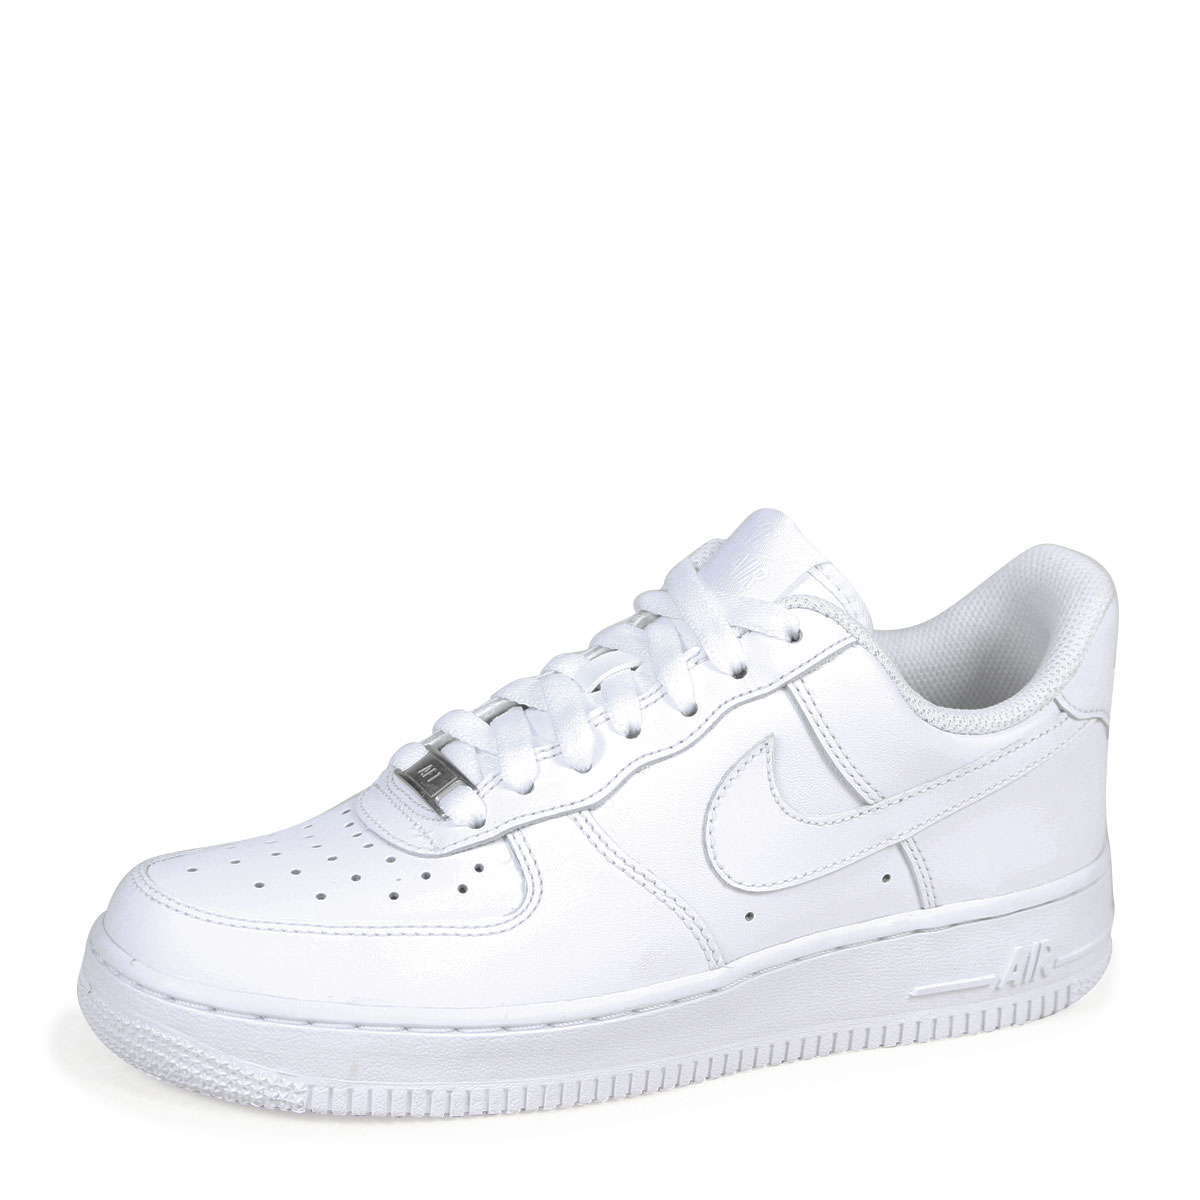 112 off white air force 1